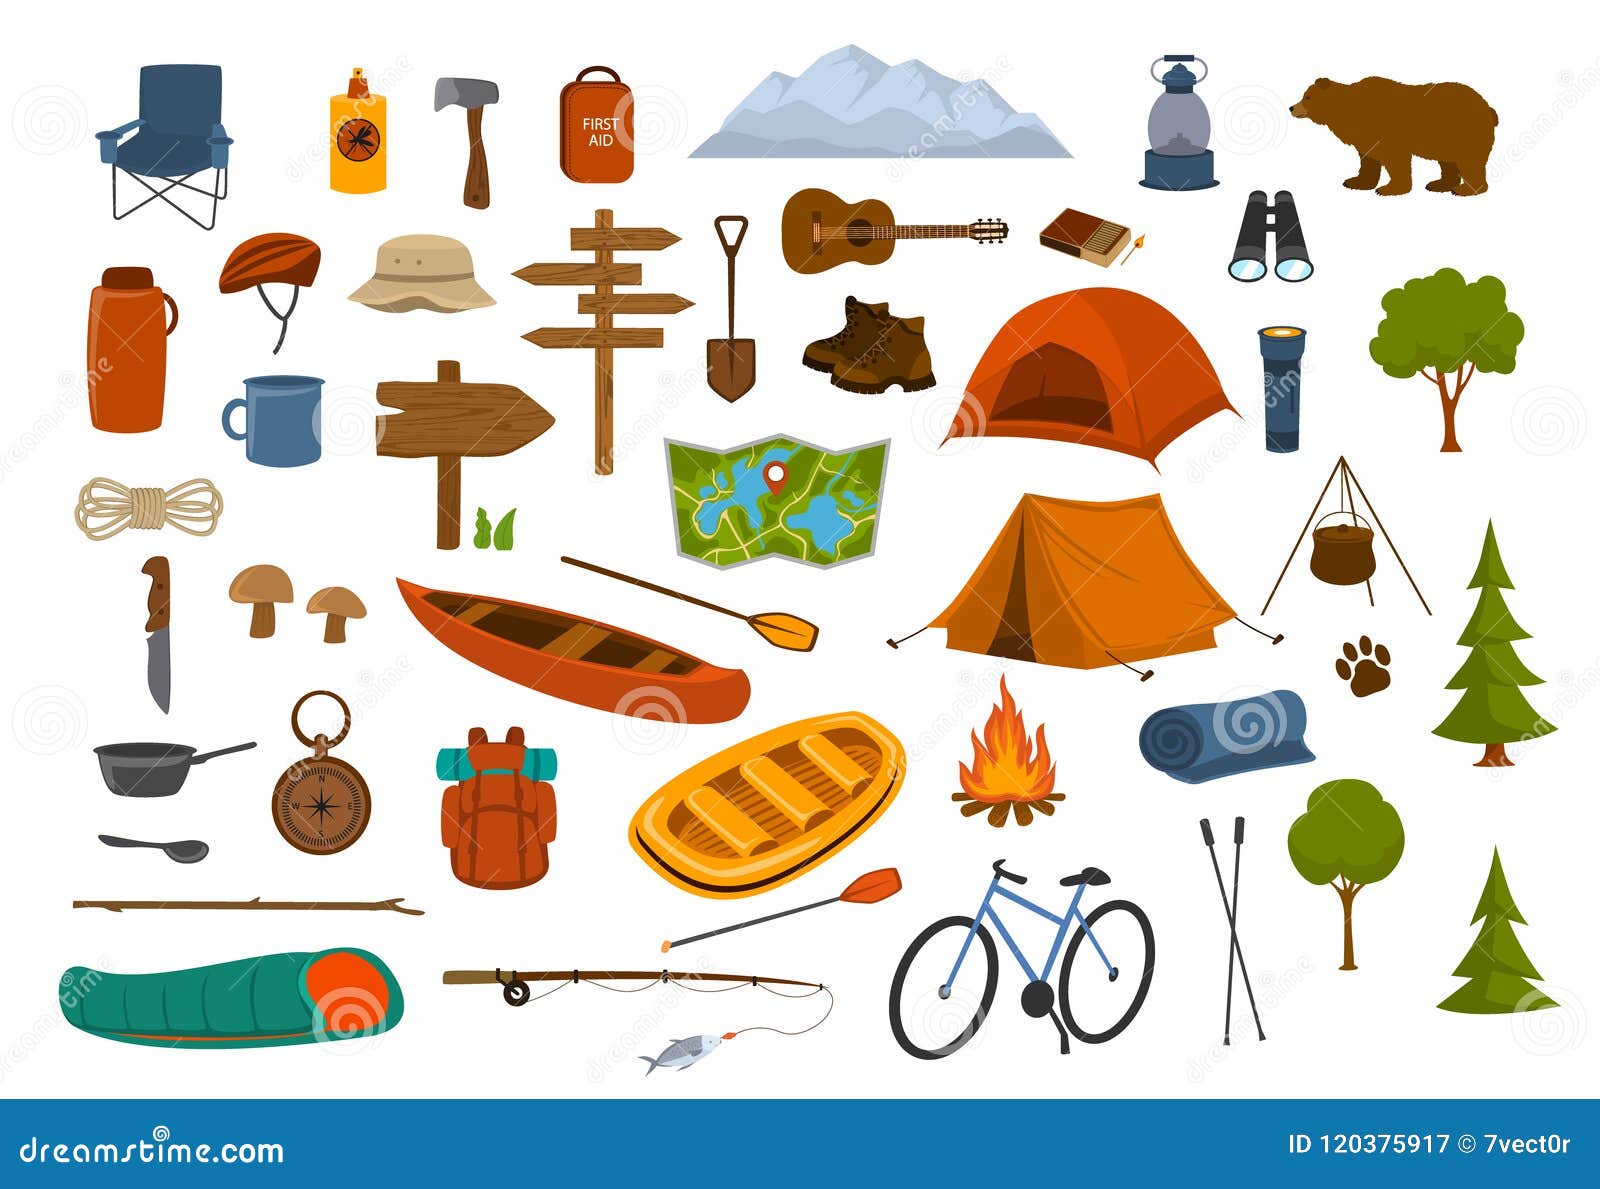 camping hiking gear and supplies graphics